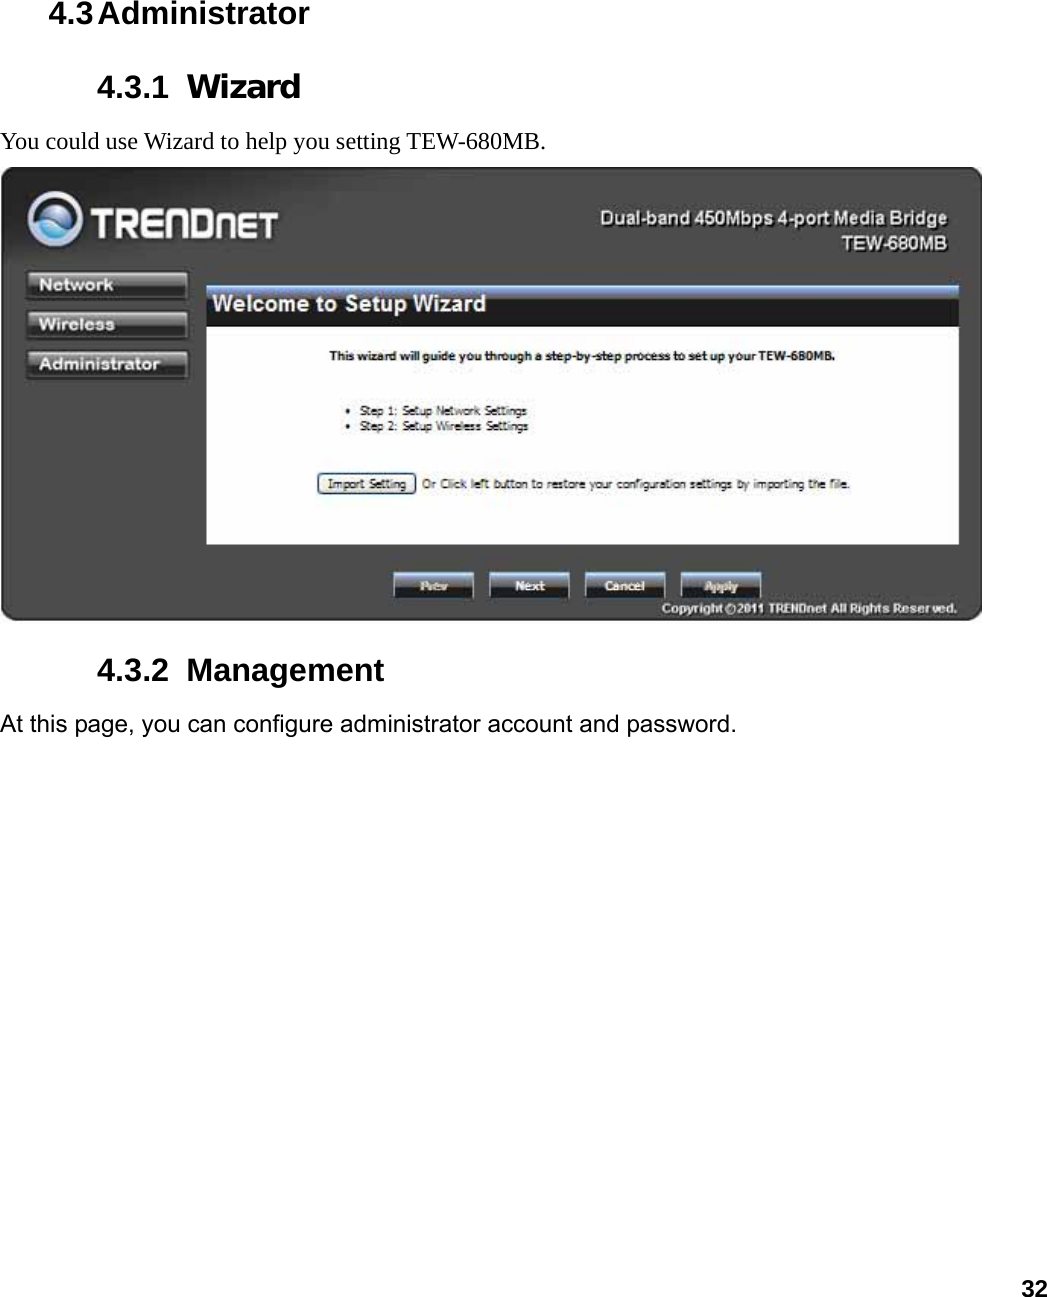                             324.3 Administrator 4.3.1  Wizard You could use Wizard to help you setting TEW-680MB.    4.3.2  Management At this page, you can configure administrator account and password. 